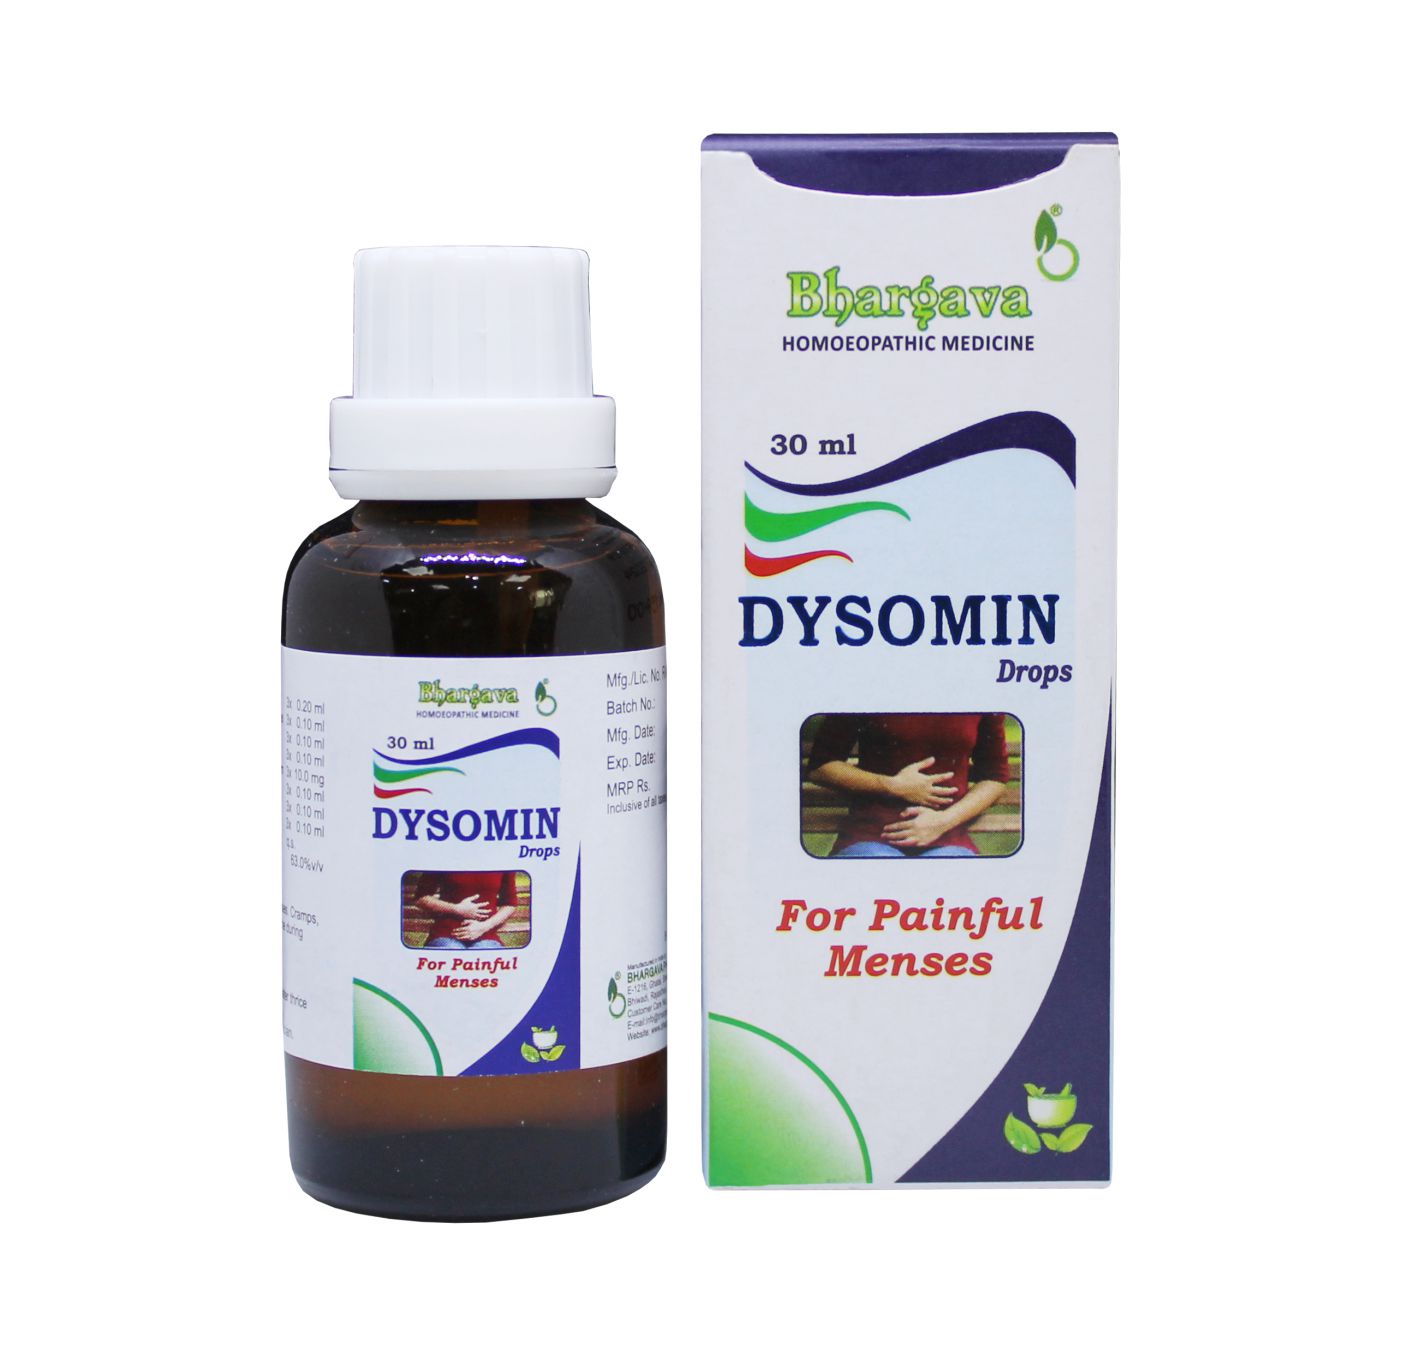 Dysomin Drops Homeopathic Medicine style=